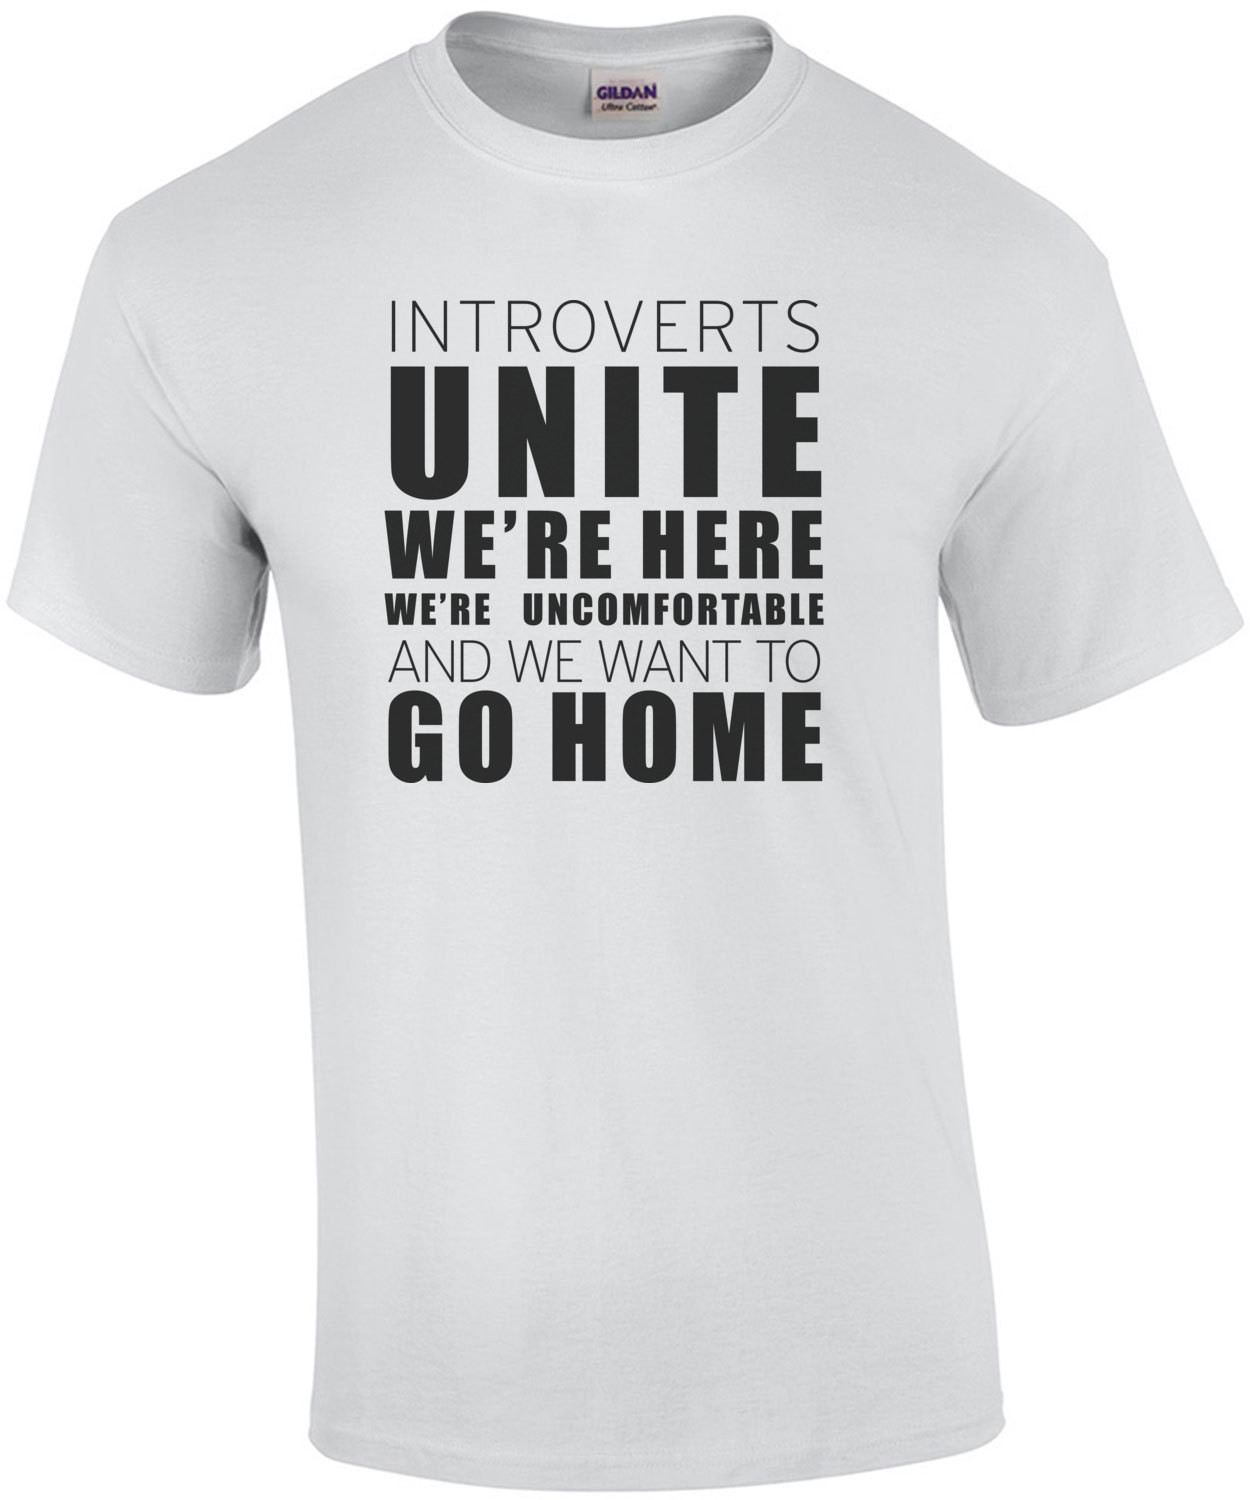 Introverts Unite We're Here We're Uncomfortable and we want to go home - funny introvert